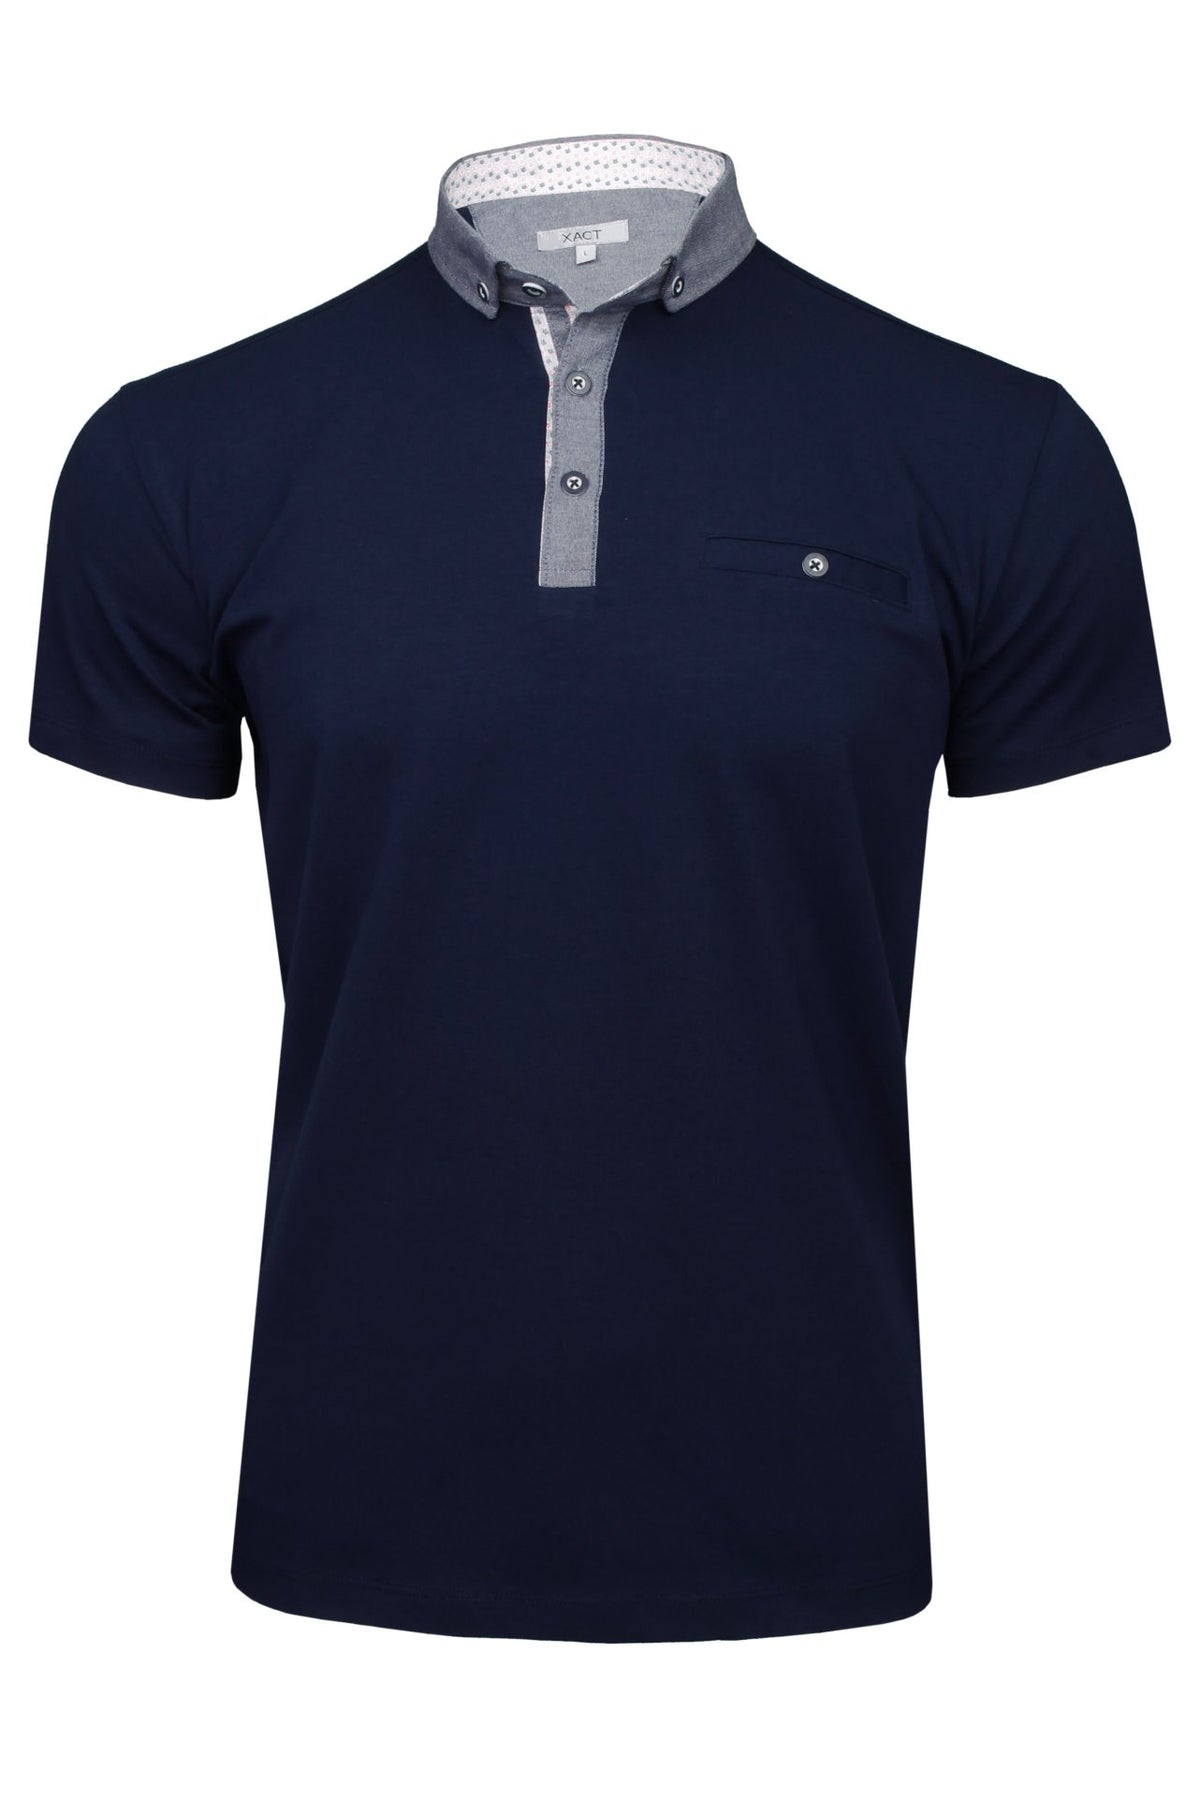 Xact Mens Polo Shirt with Short Sleeves and Button Down Collar, 01, Xp1076, Navy